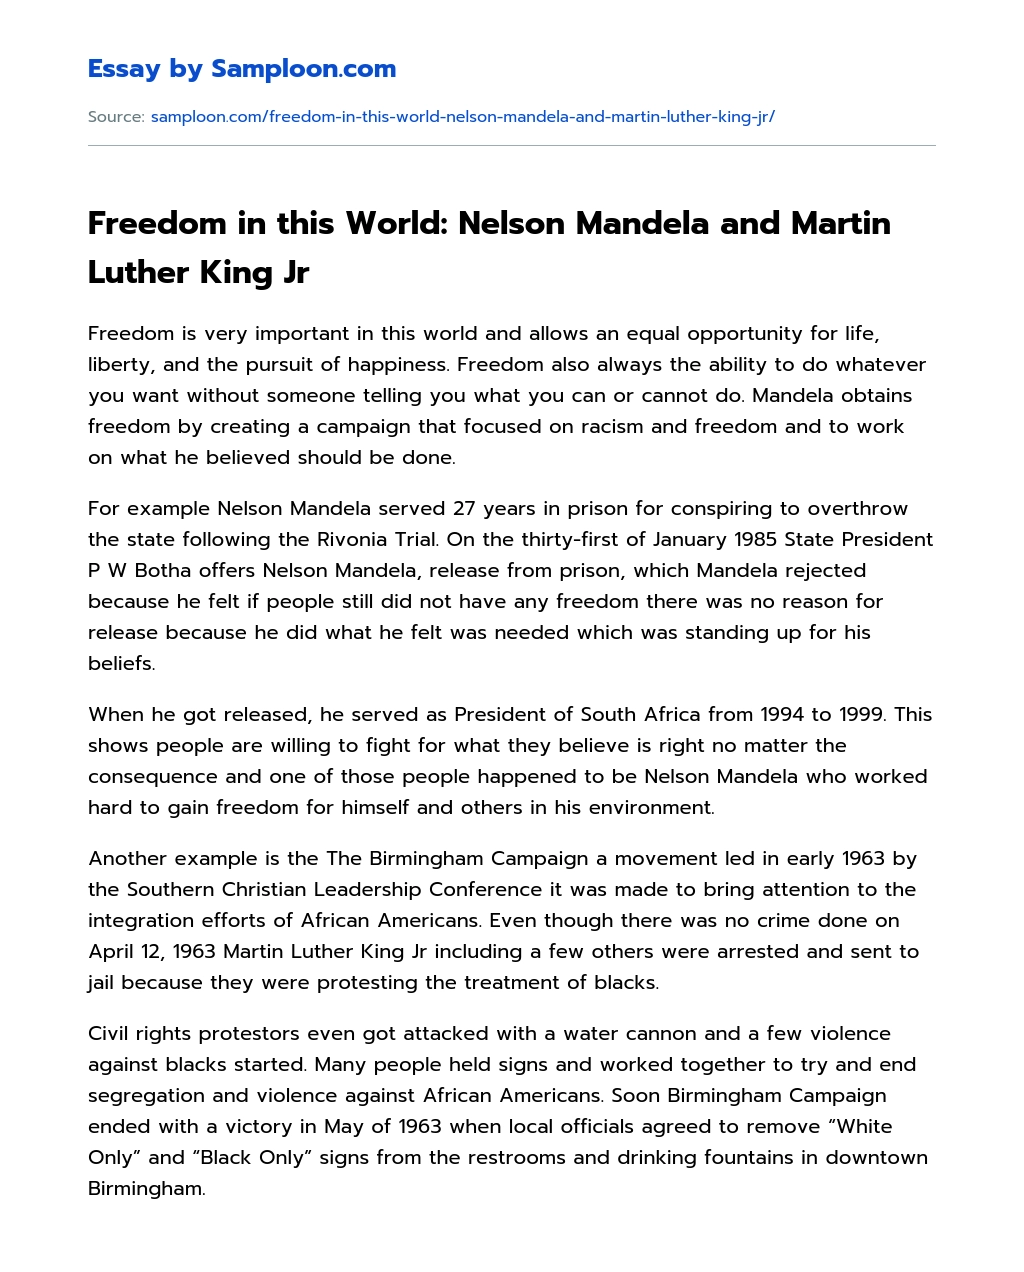 Freedom in this World: Nelson Mandela and Martin Luther King Jr essay